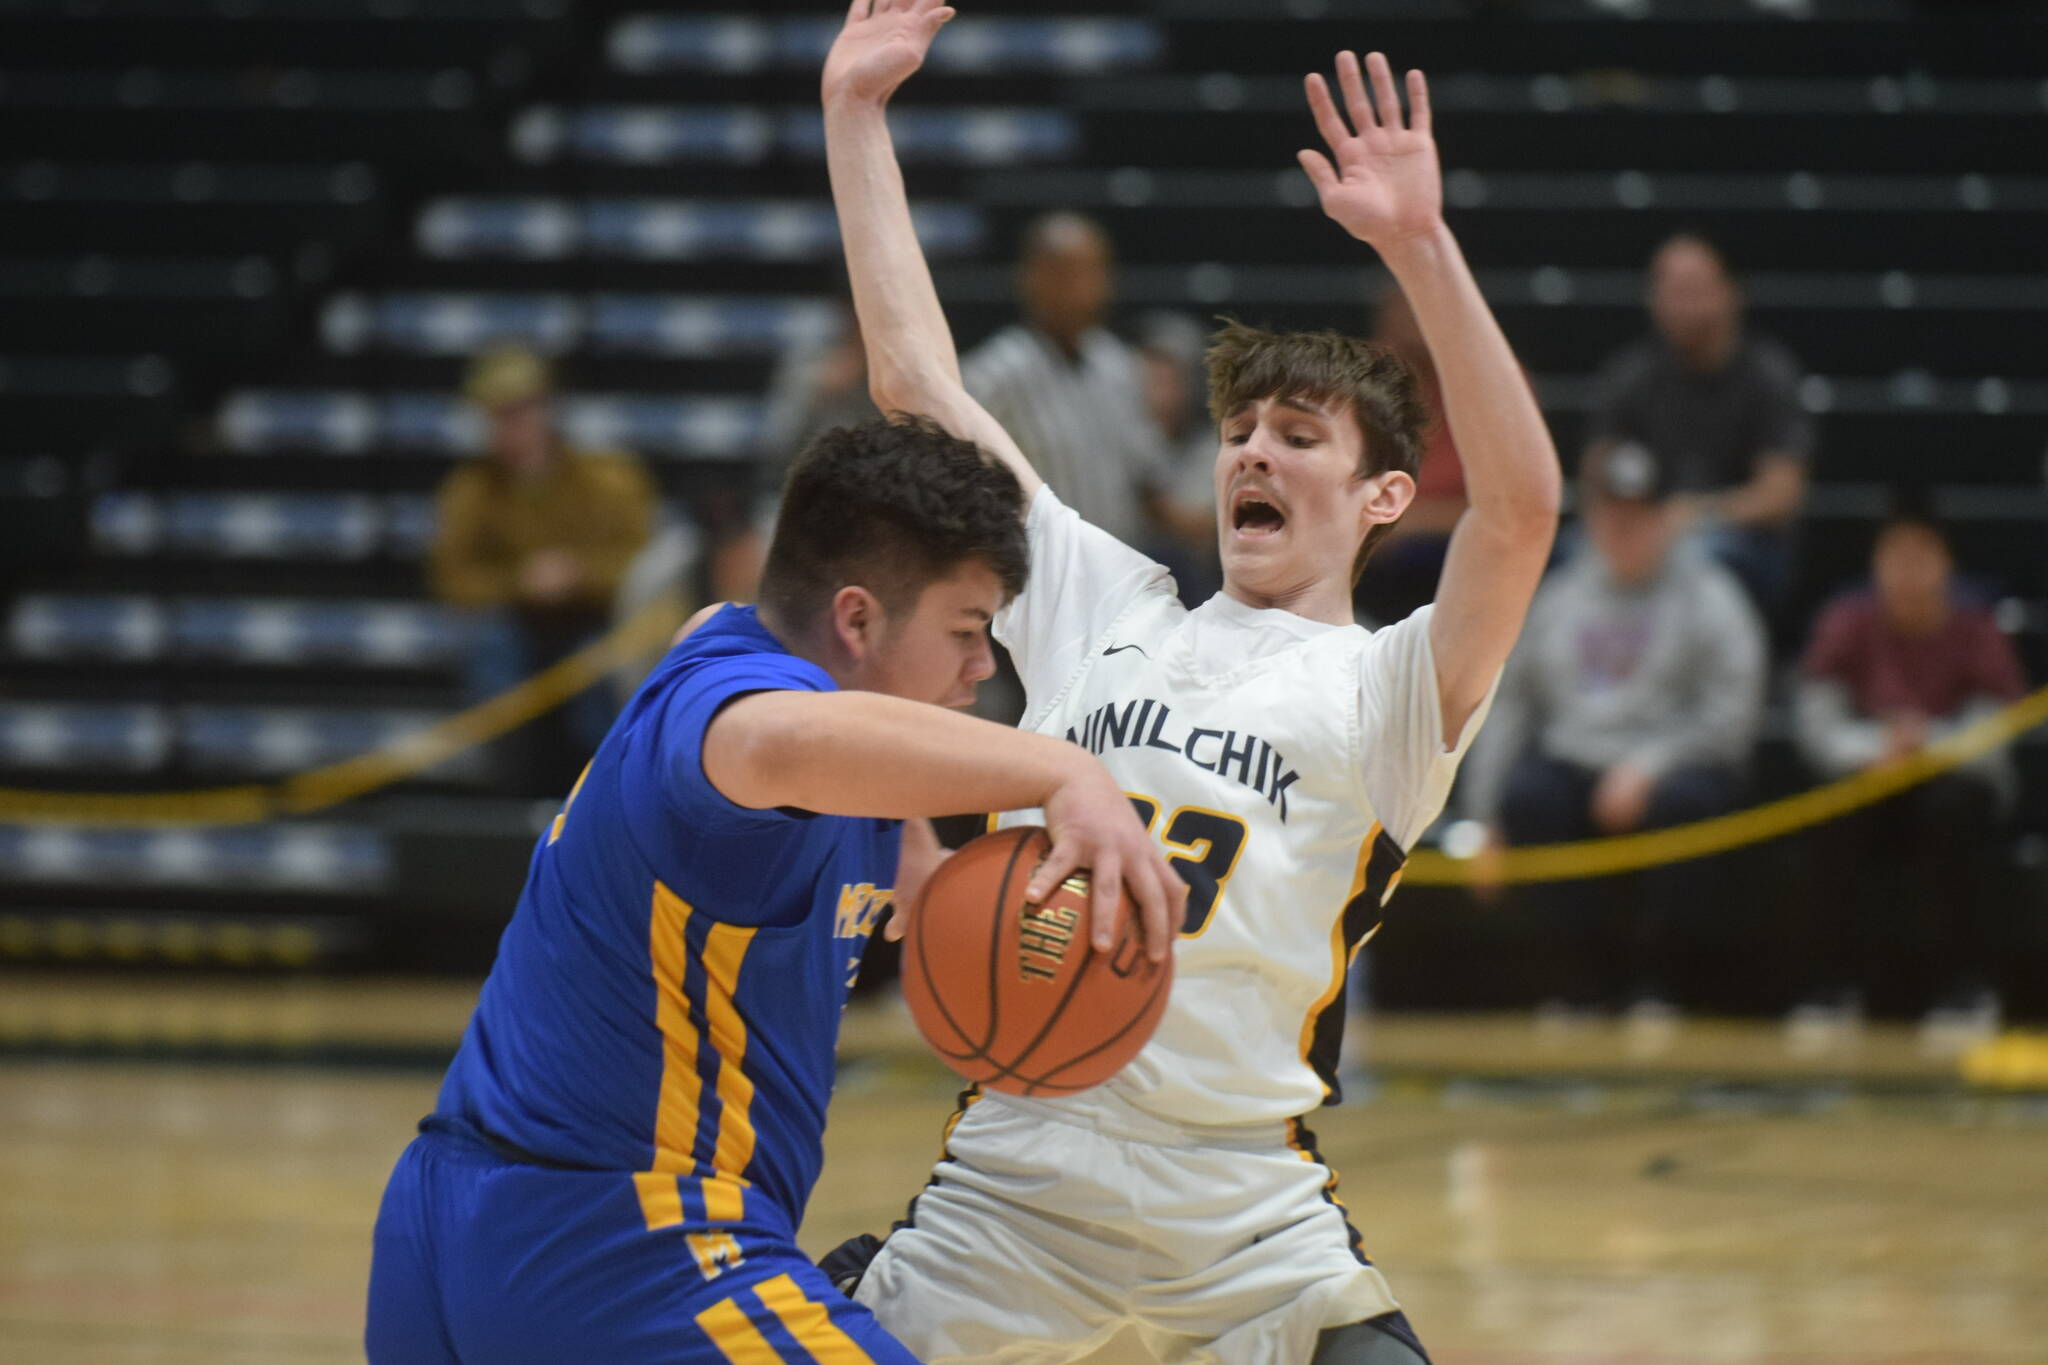 Iukah Kalugin defends against Metlakatla's Cameron Gaube during the 2A state basketball championship game at the Alaska Airlines Center in Anchorage, Alaska on Saturday, March 19, 2022. (Camille Botello/Peninsula Clarion)